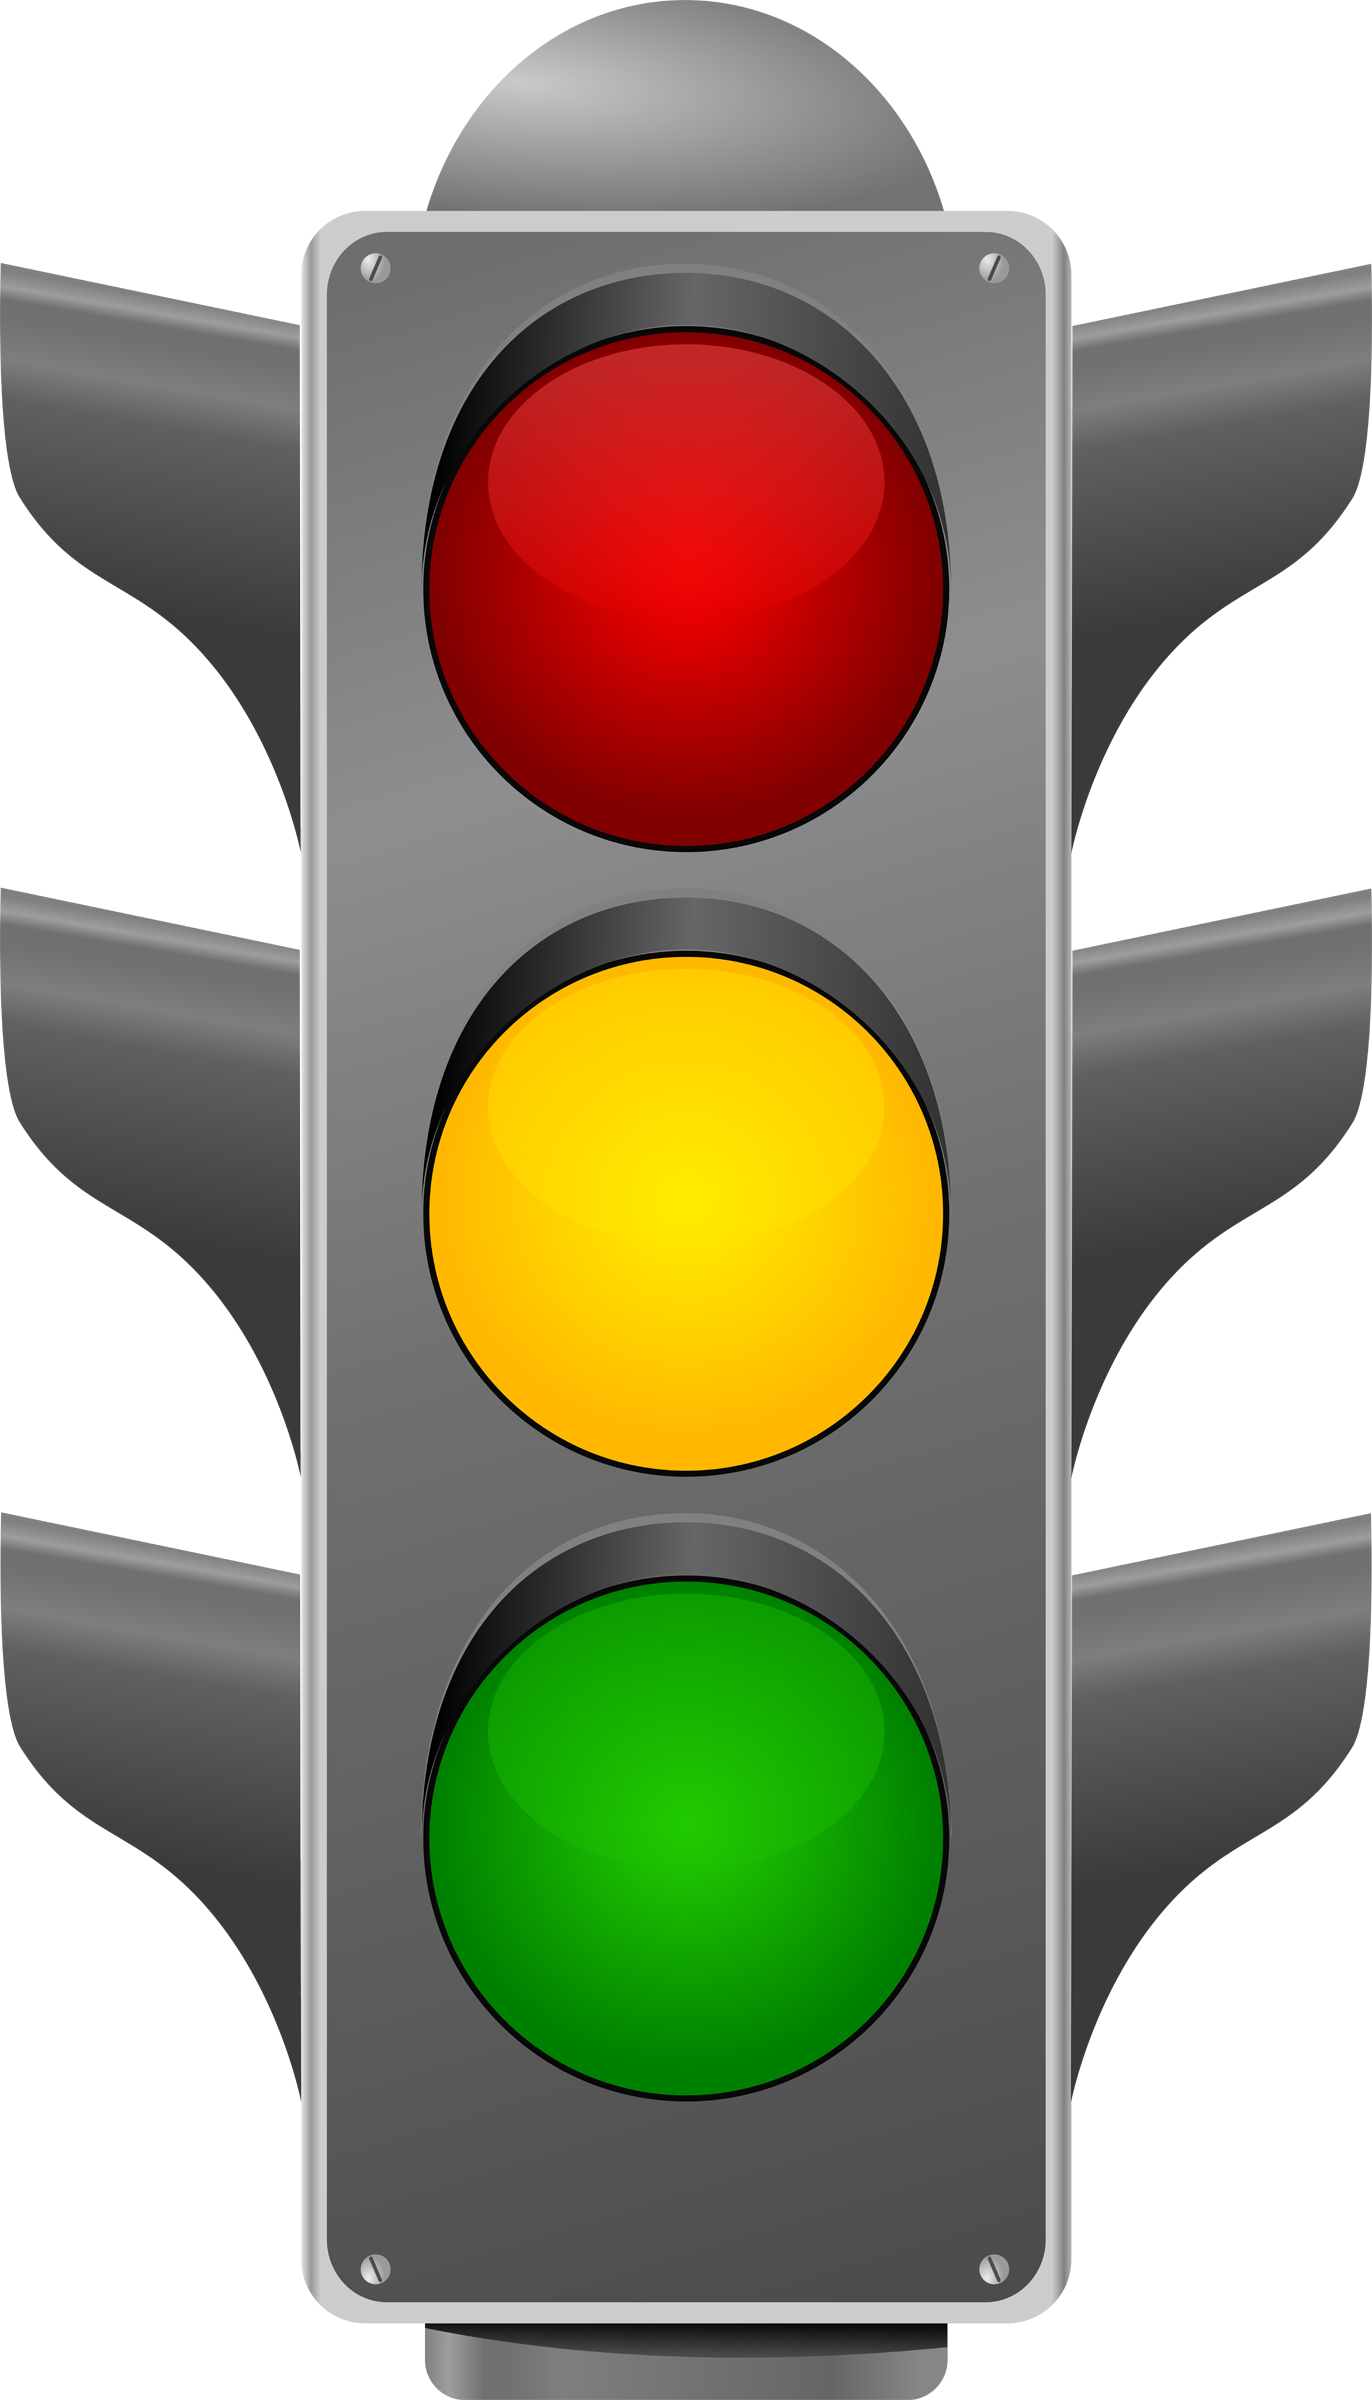 traffic-signal-images-clipart-best